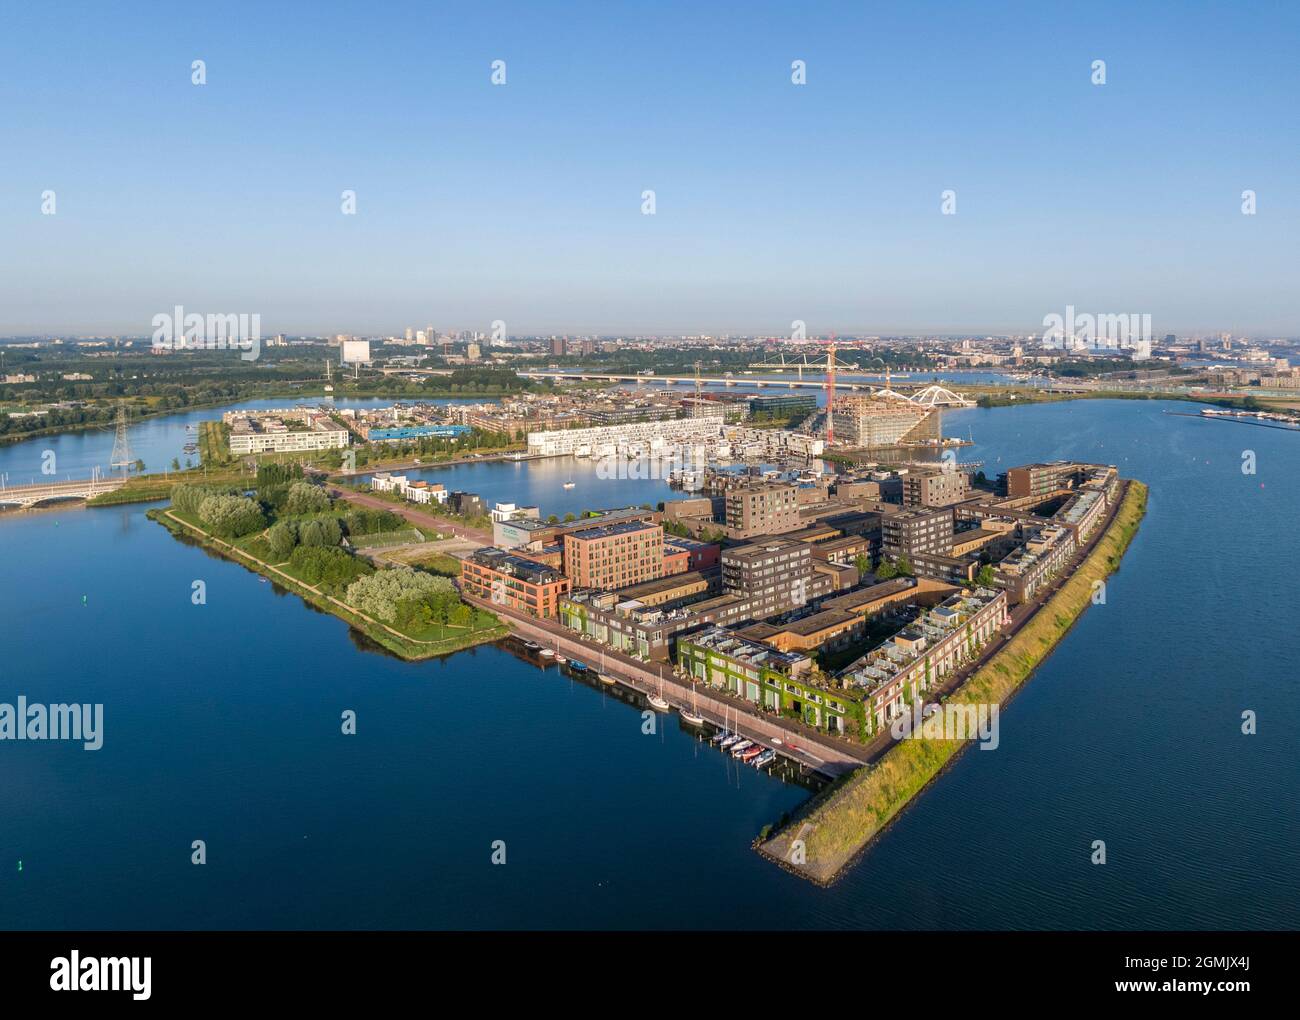 Aerial view of Steiger island and new residential district in Amsterdam Stock Photo